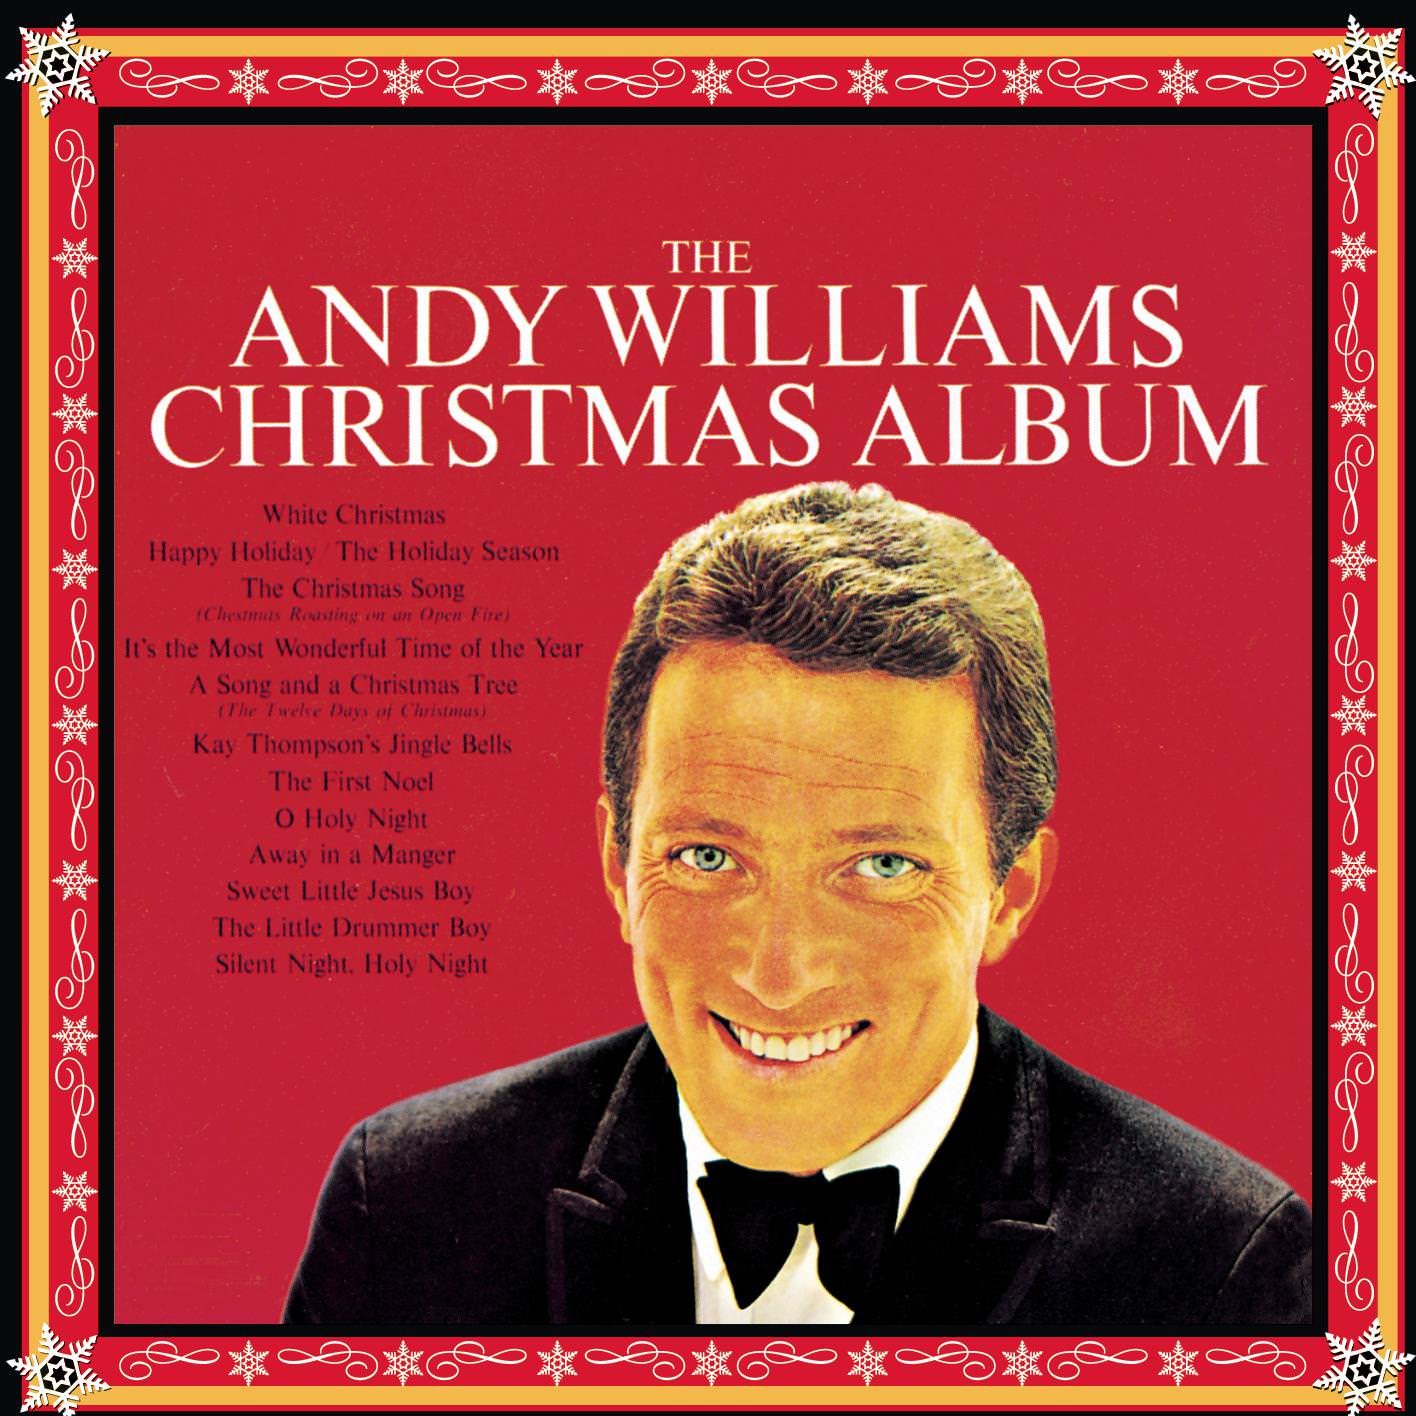 Andy Williams – The Andy Williams Christmas Album (1963/2013) [HDTracks FLAC 24bit/192kHz]